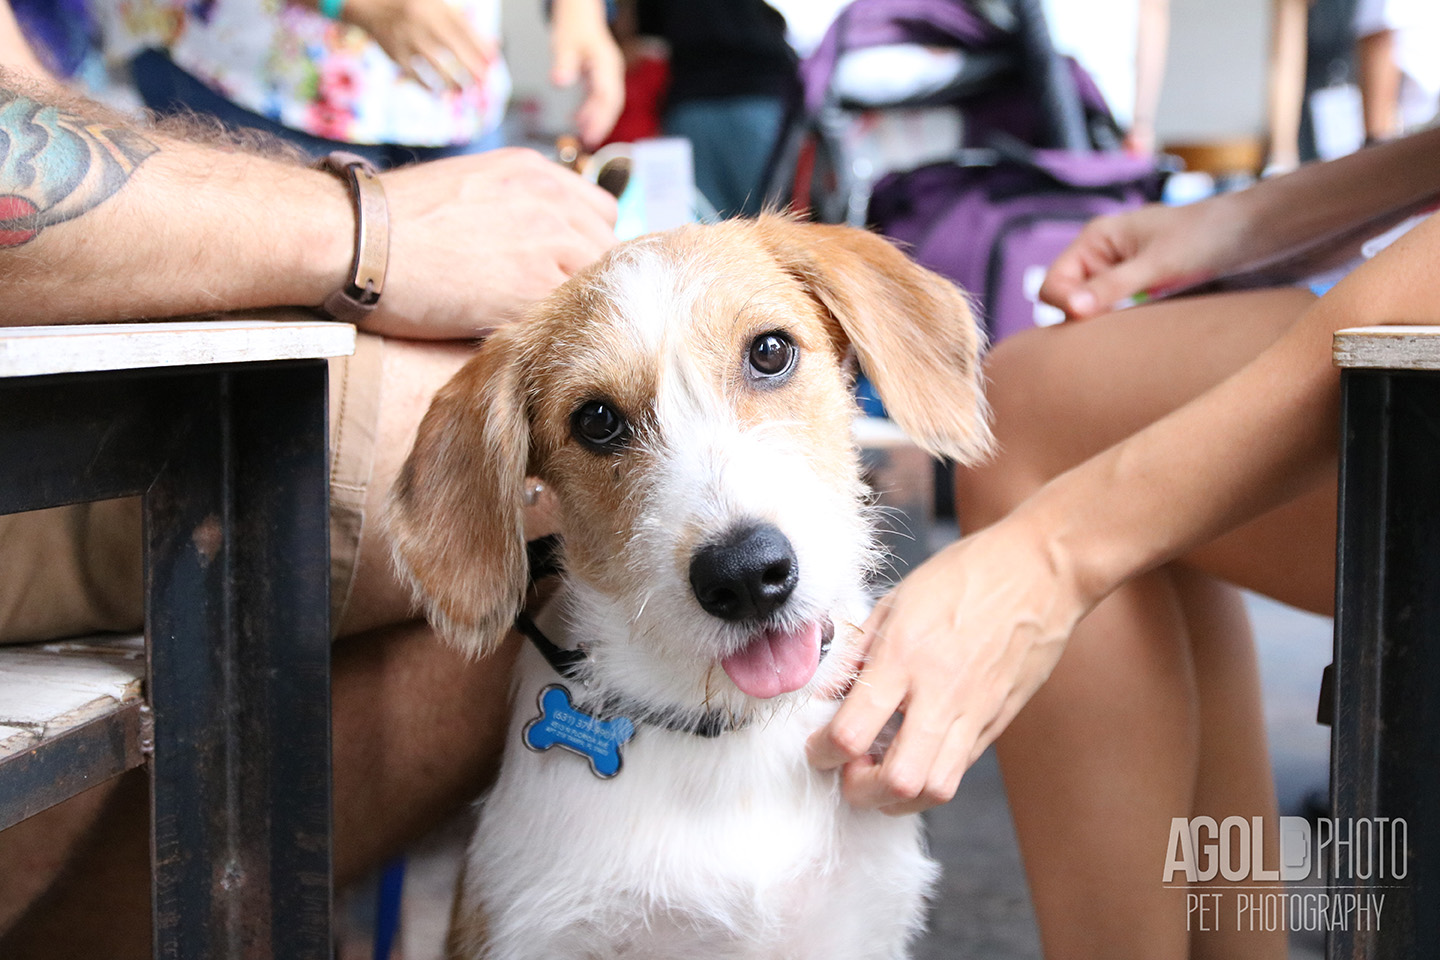 Seminole Heights Pup Crawl_AGoldPhoto Pet Photography_6